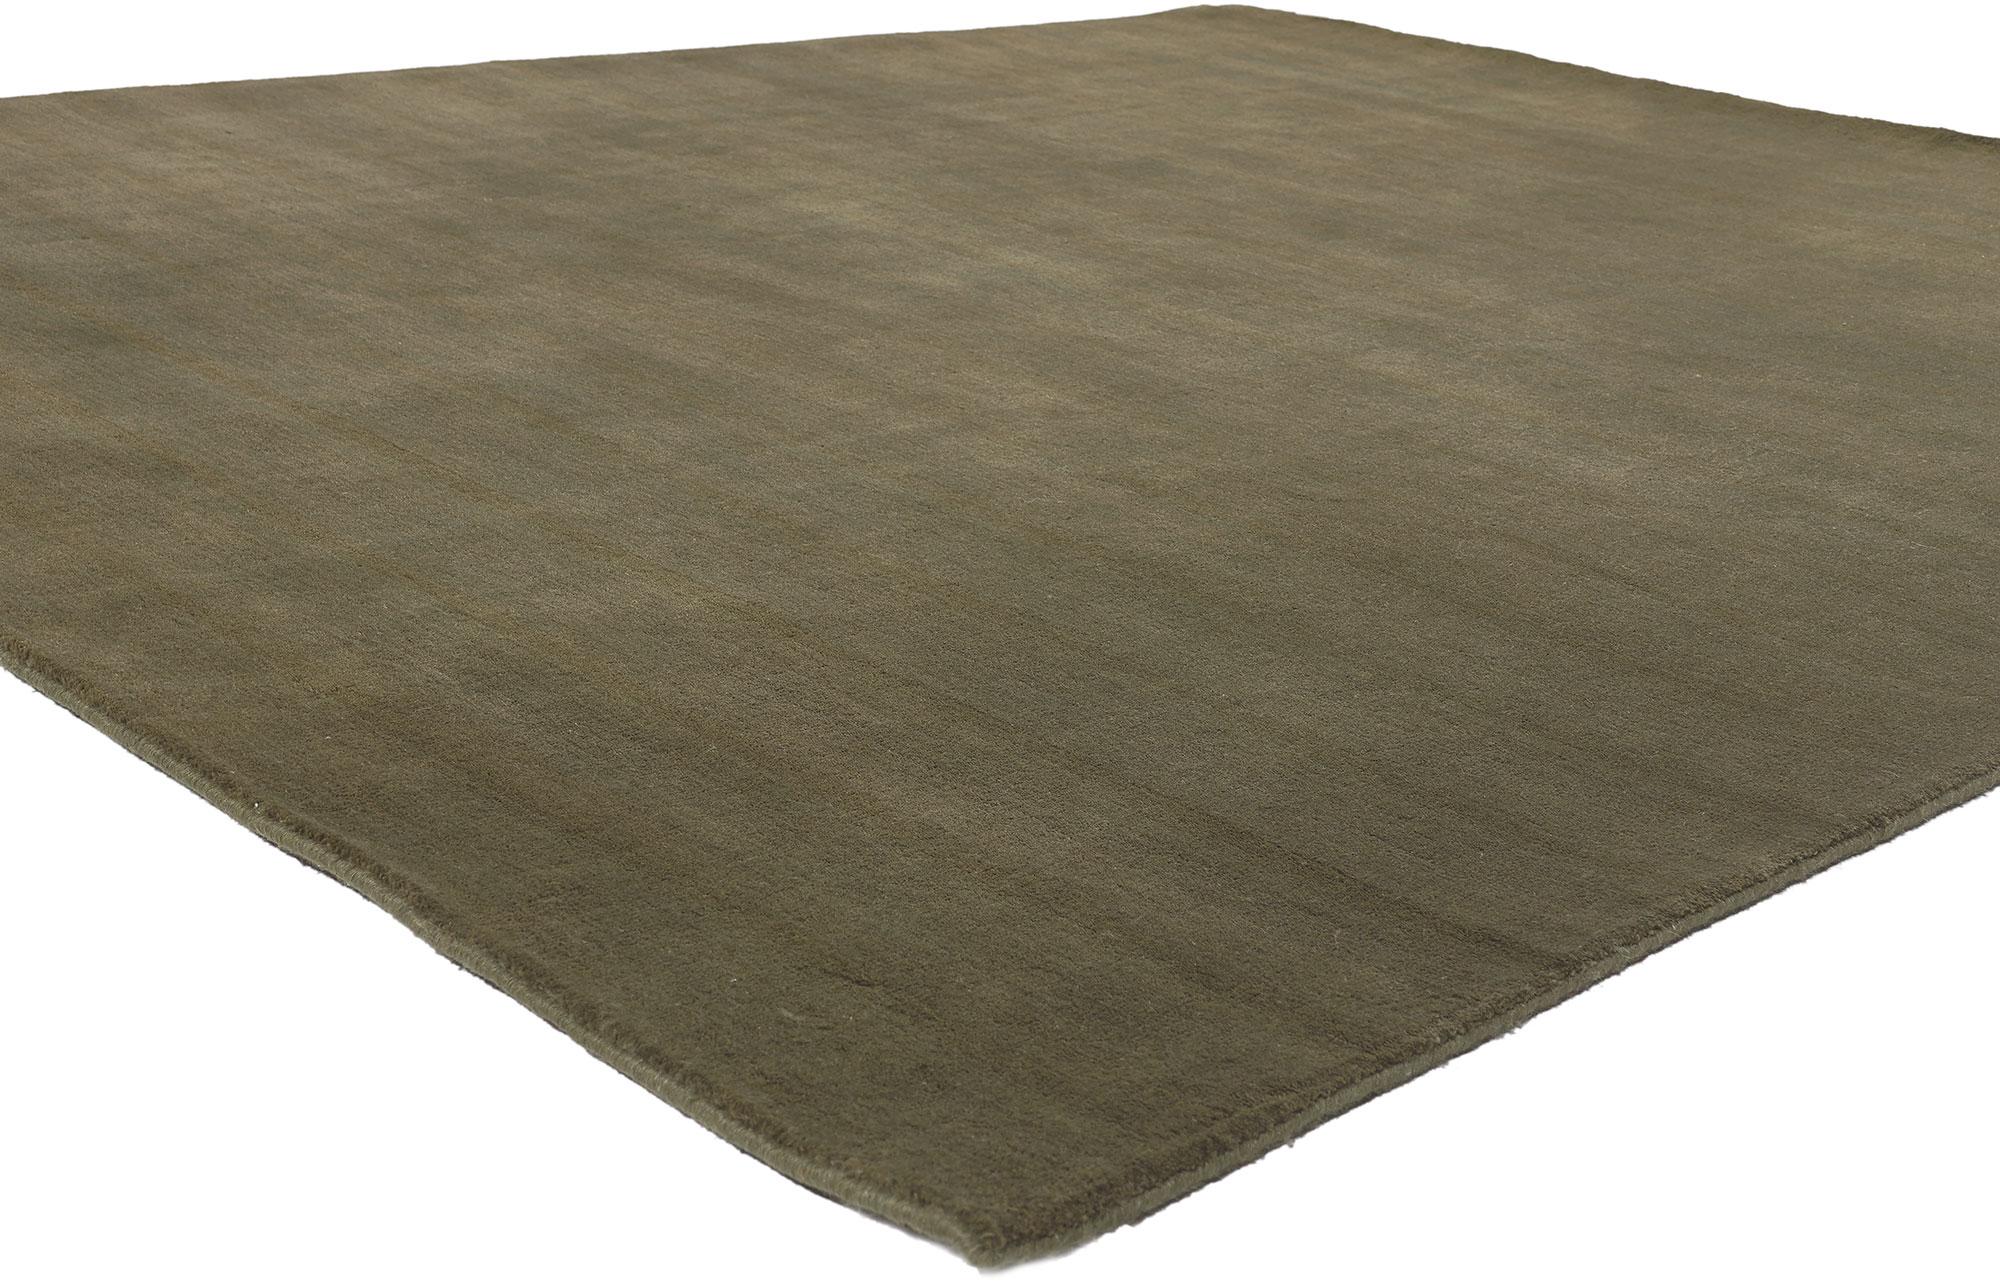 30998 New Moss-Olive Green Modern Rug, 07'00 x 08'10.
Biophilic Design meets earth-tone elegance in this handcrafted modern olive green area rug. The lavish texture and earthy green colorway woven into this piece work together creating a truly